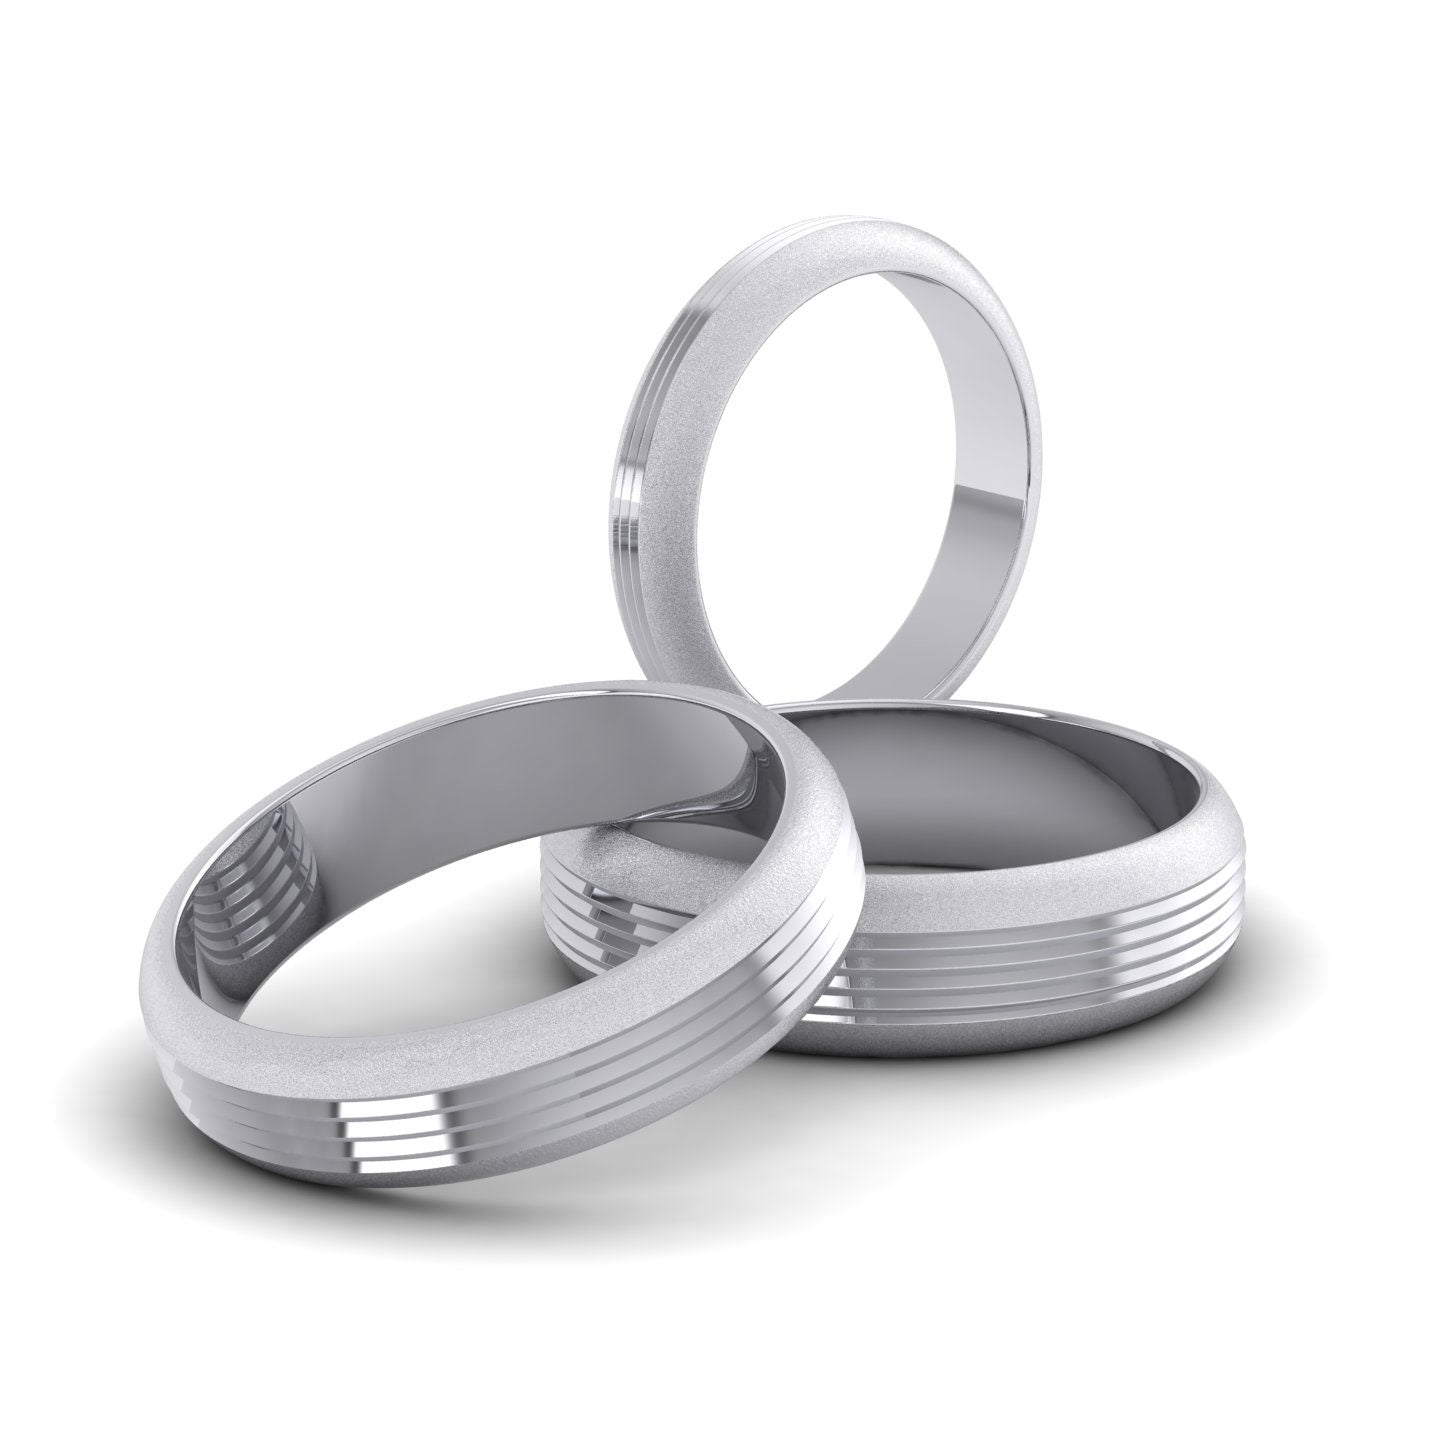 Grooved Pattern 14ct White Gold 6mm Wedding Ring